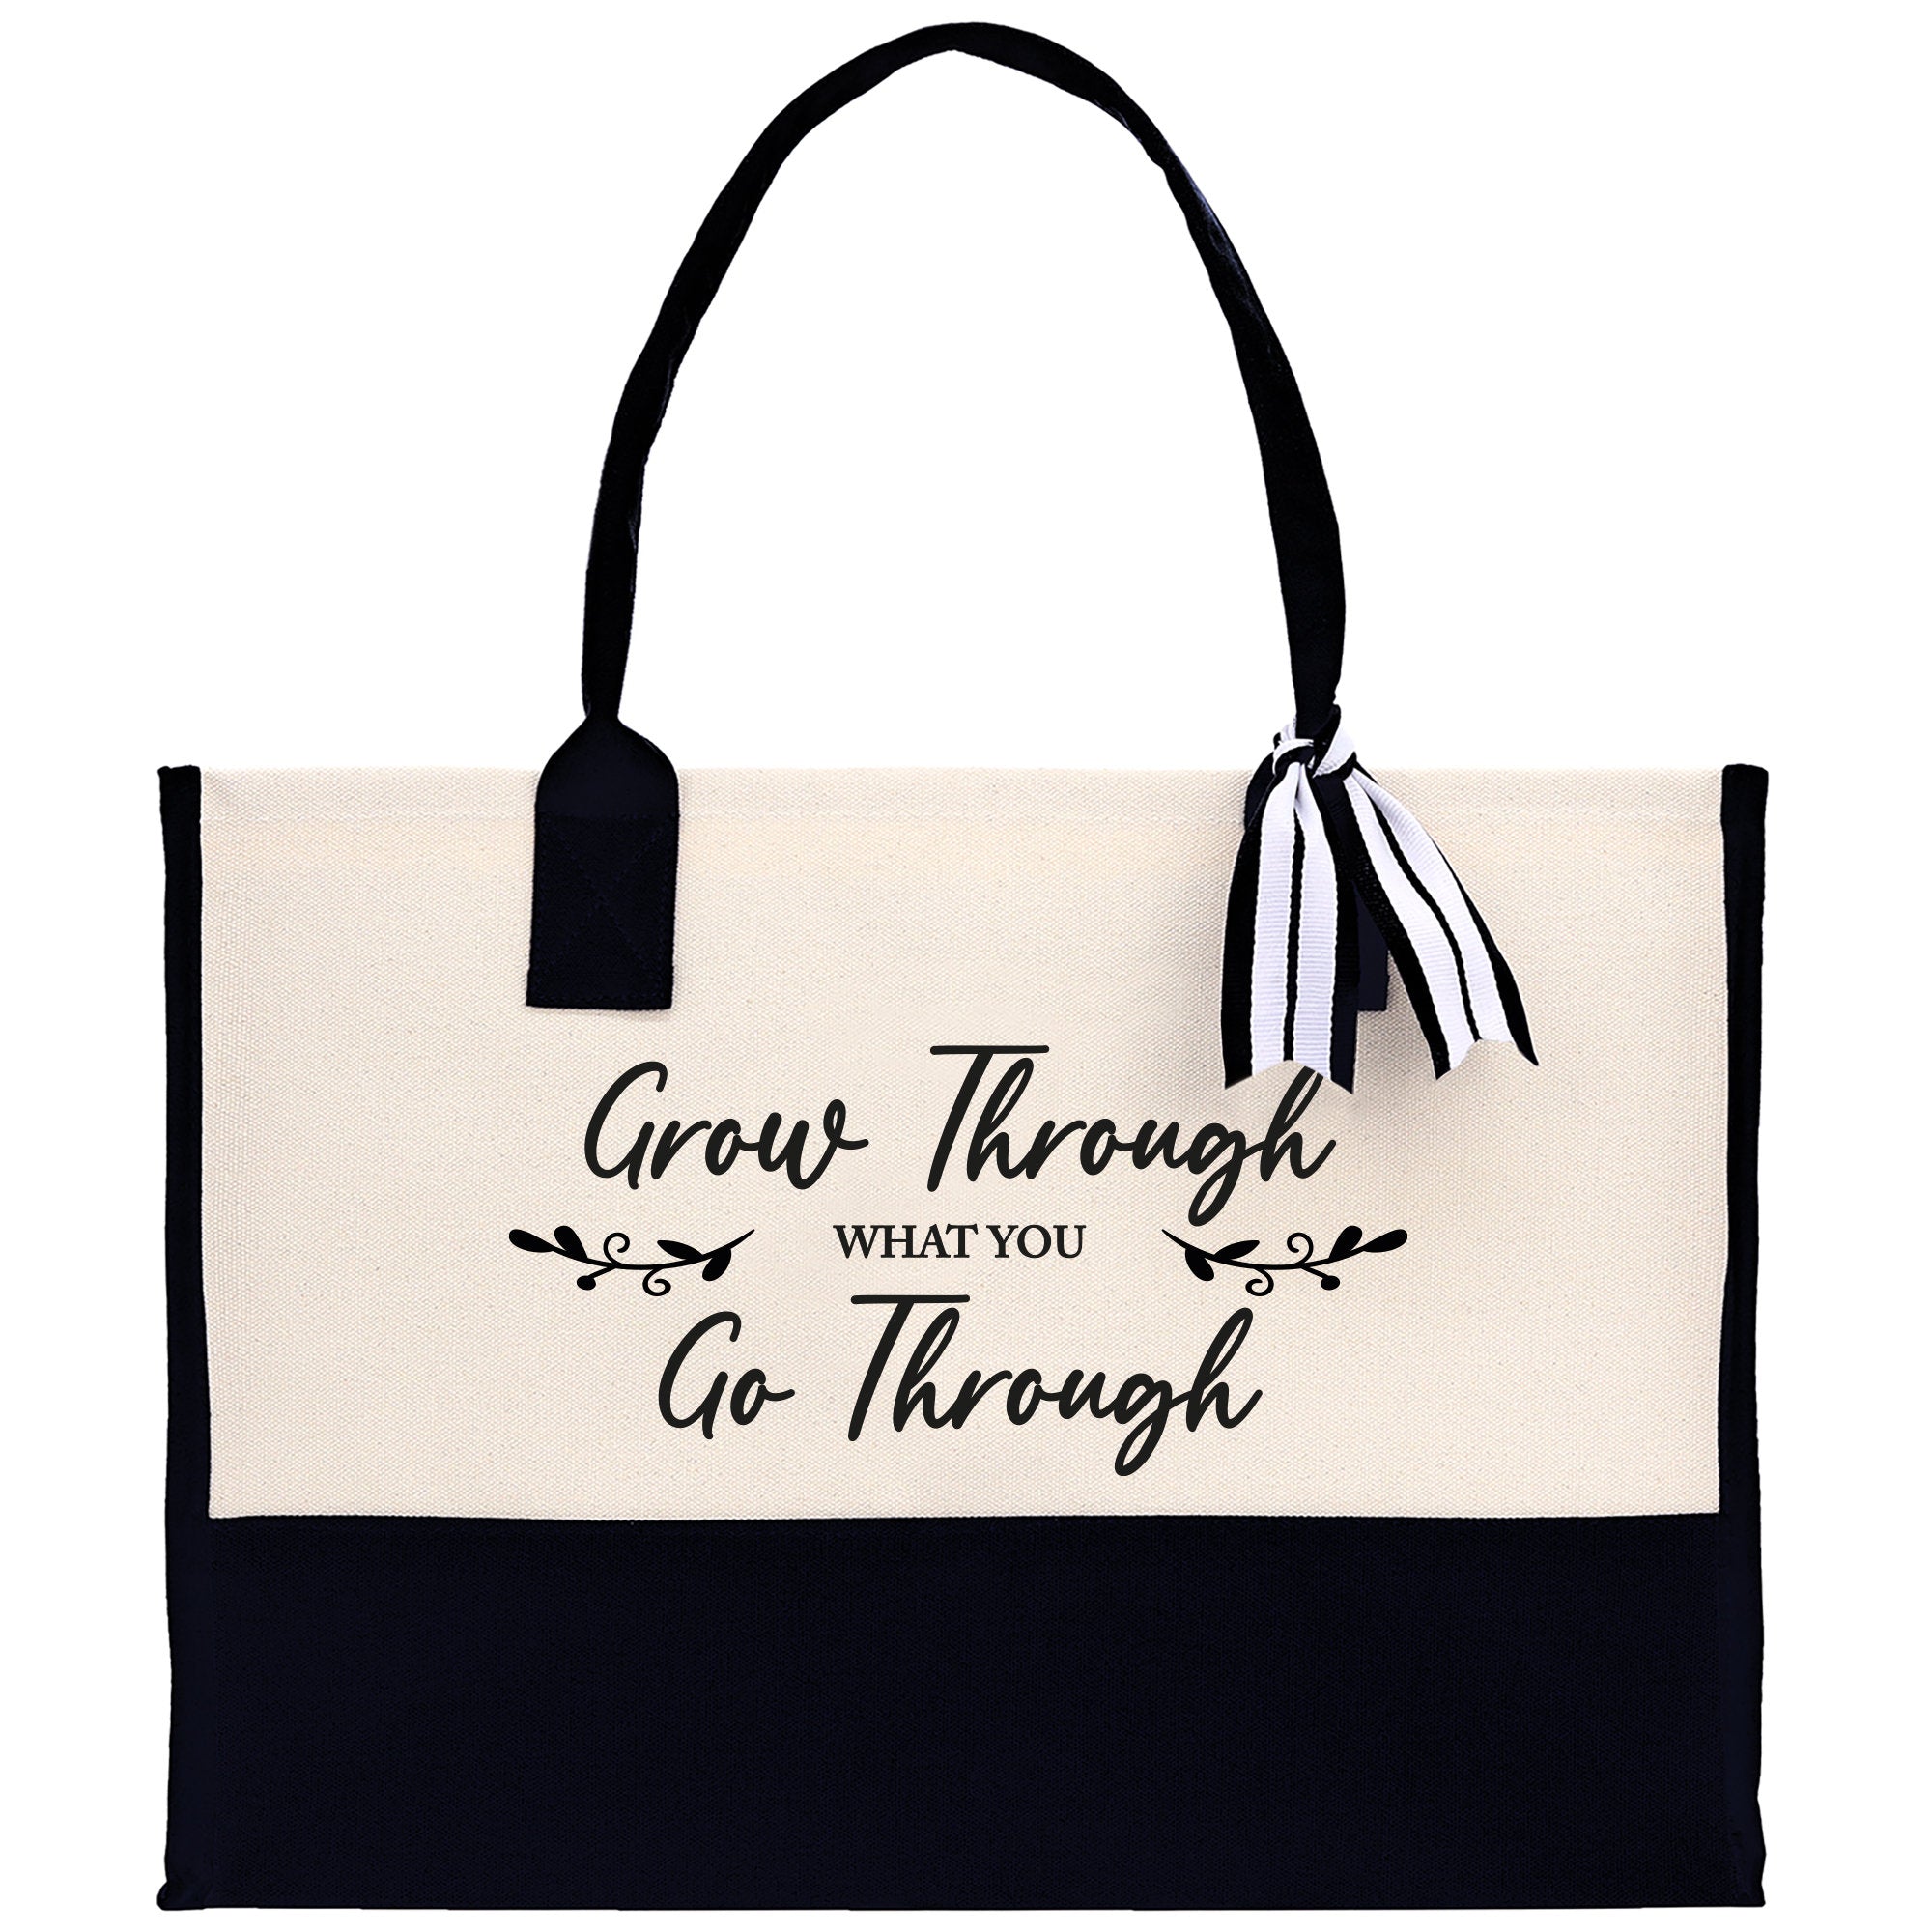 Grow Through What You Go Through Canvas Tote Bag Birthday Gift for Her Weekender Tote Bag Beach Tote Bag Large Beach Tote Bag Beach Tote Bag